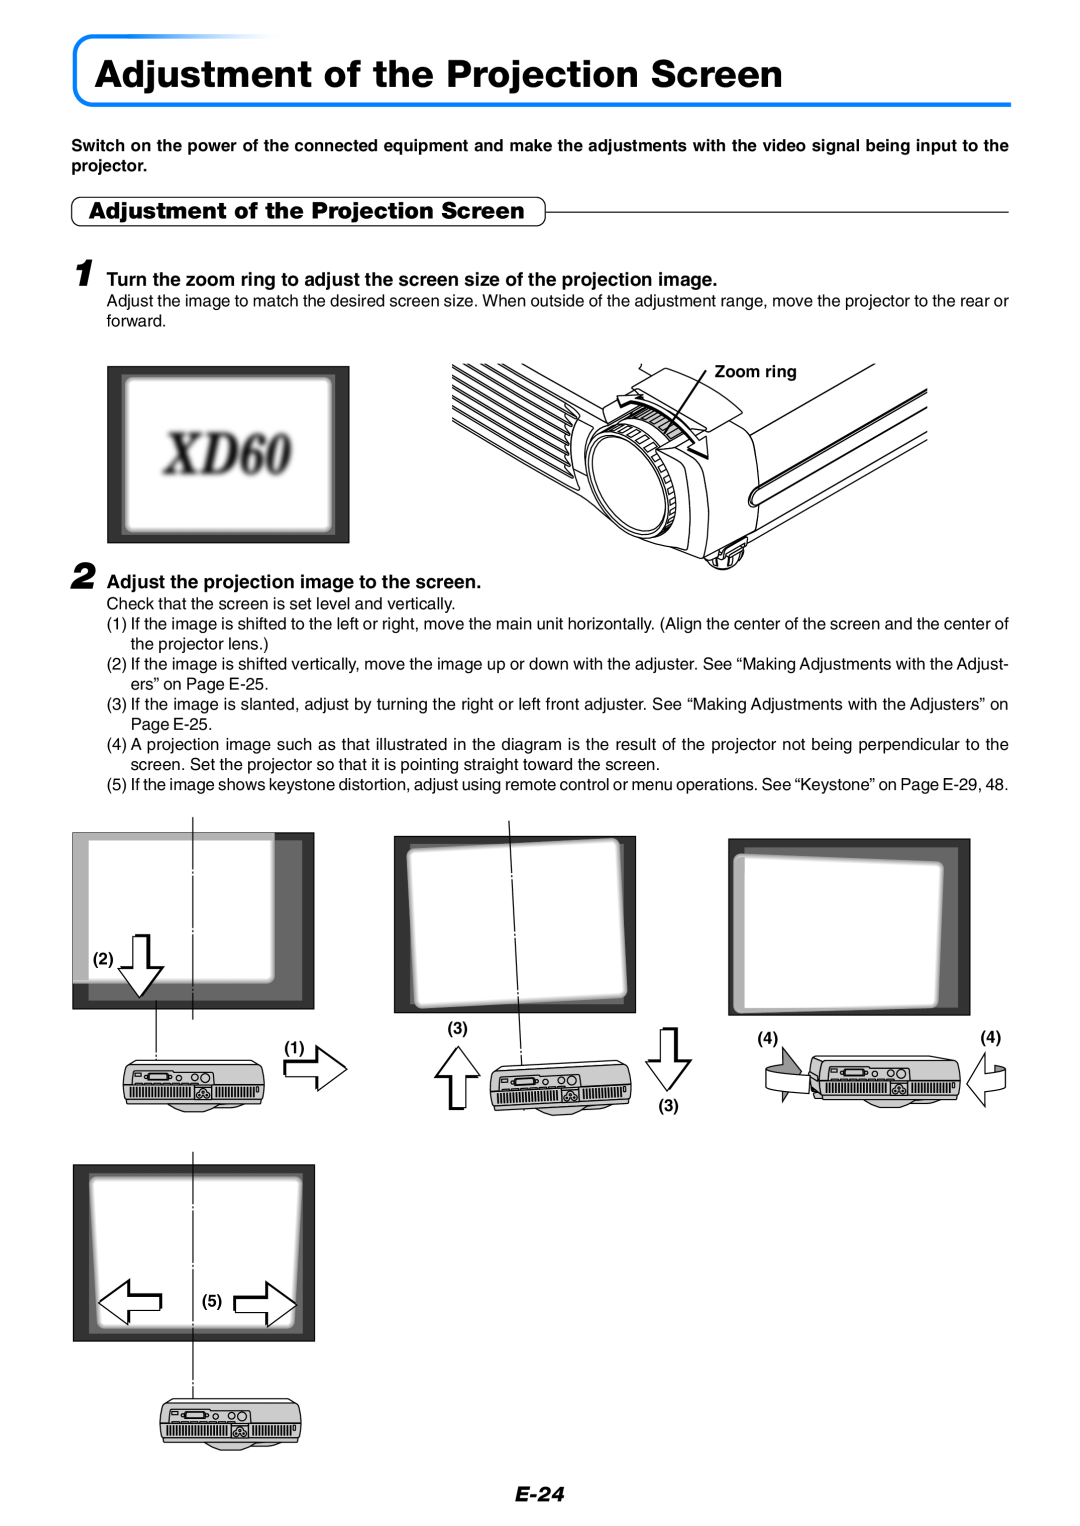 Mitsubishi Electronics XD60U Adjustment of the Projection Screen, E-24, Adjust the projection image to the screen 